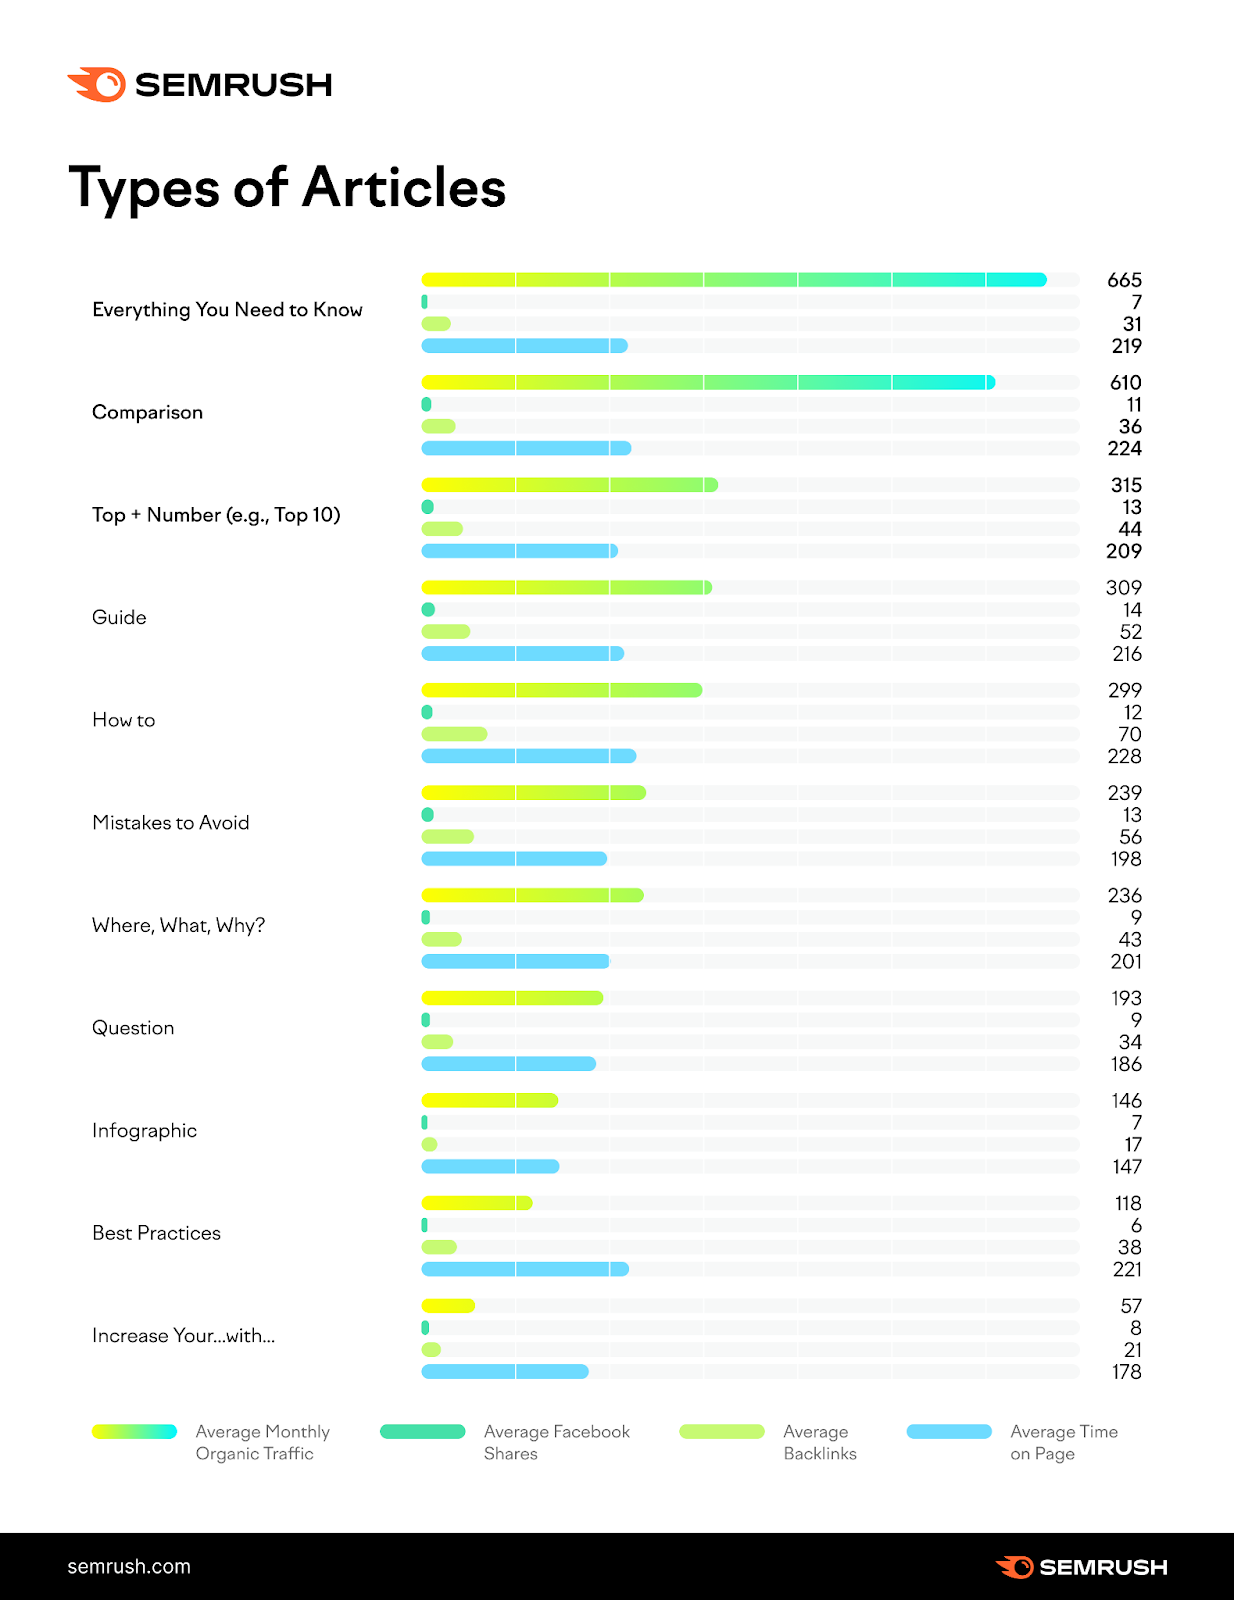 Top article types